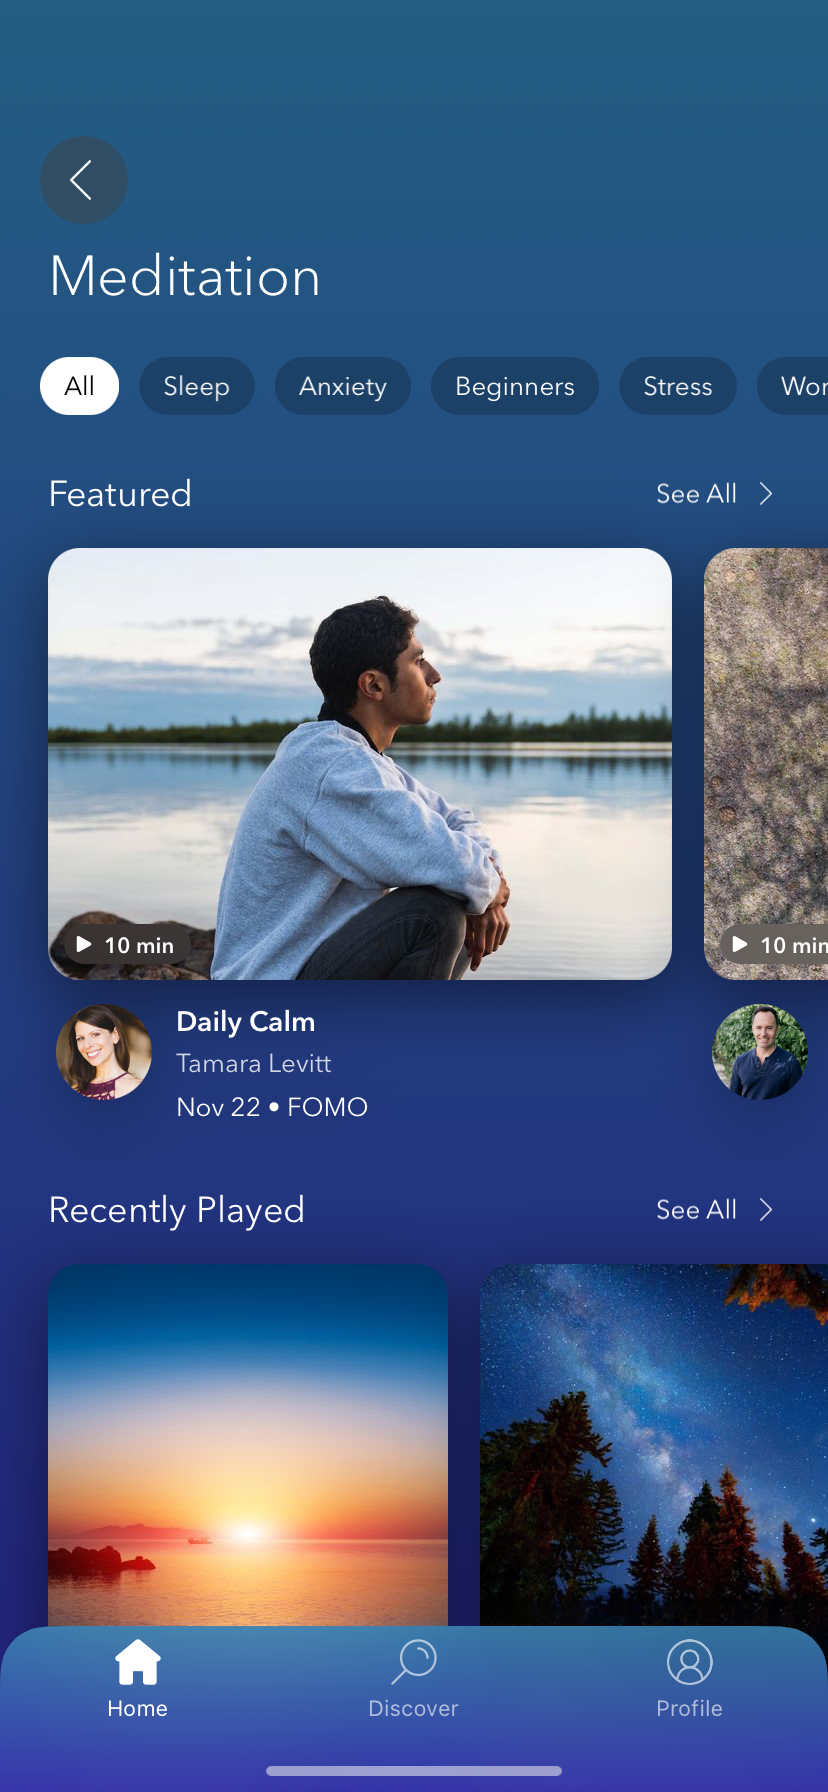 Image shows the Meditation section inside the Calm app